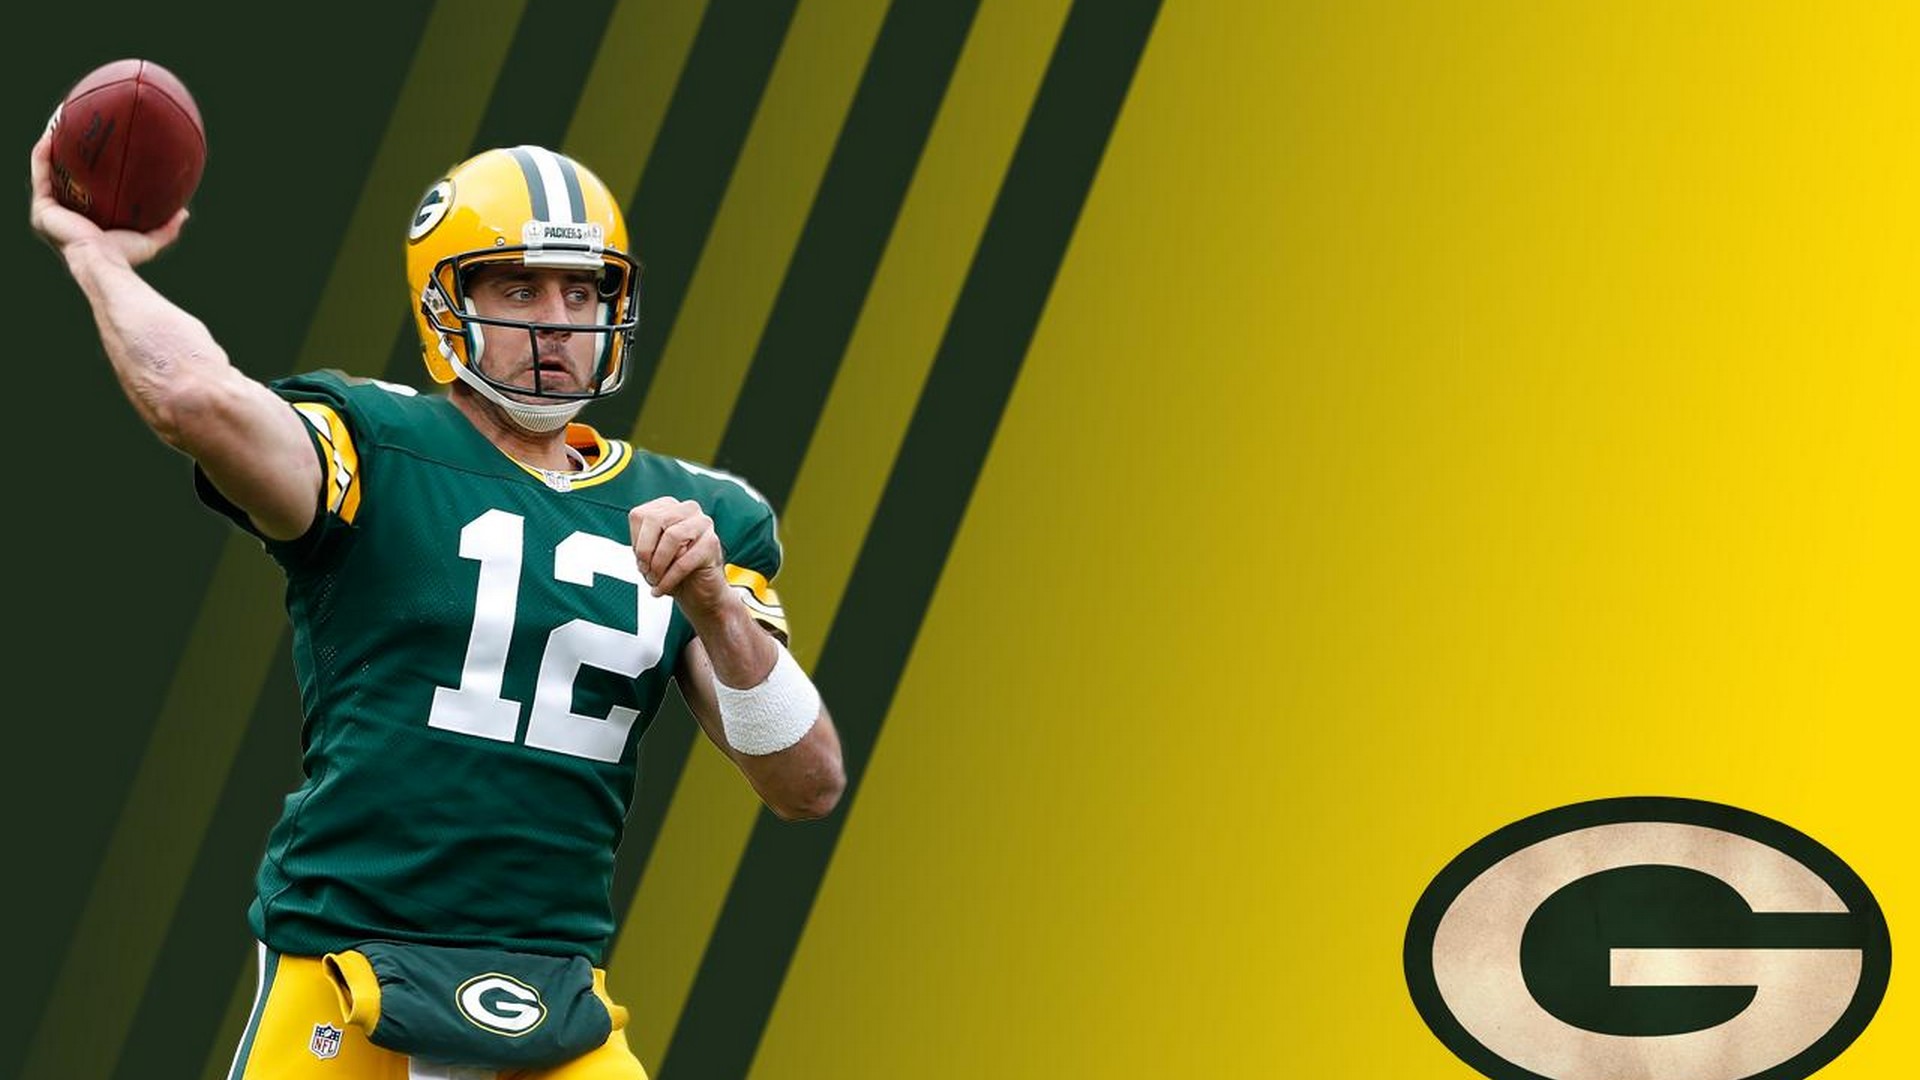 HD Backgrounds Aaron Rodgers with high-resolution 1920x1080 pixel. You can use this wallpaper for your Mac or Windows Desktop Background, iPhone, Android or Tablet and another Smartphone device